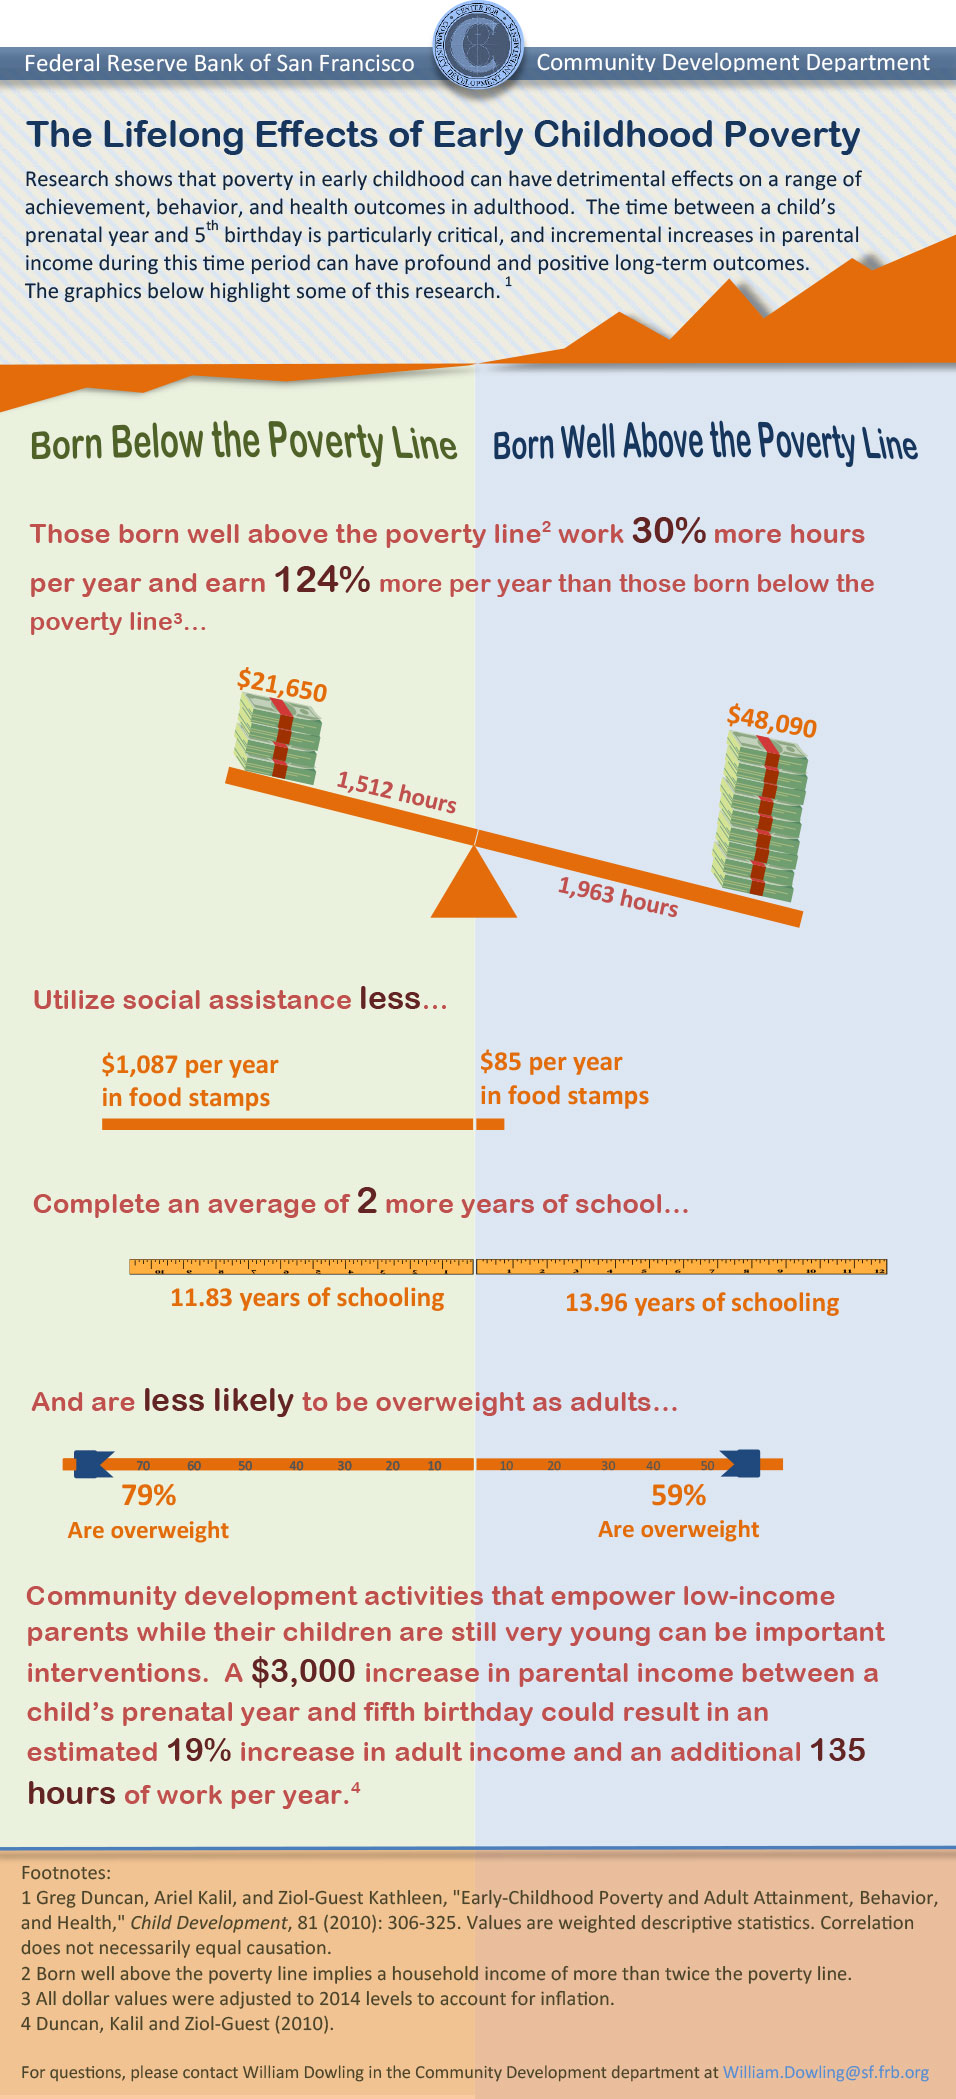 The Lifelong Effects of Early Childhood Poverty